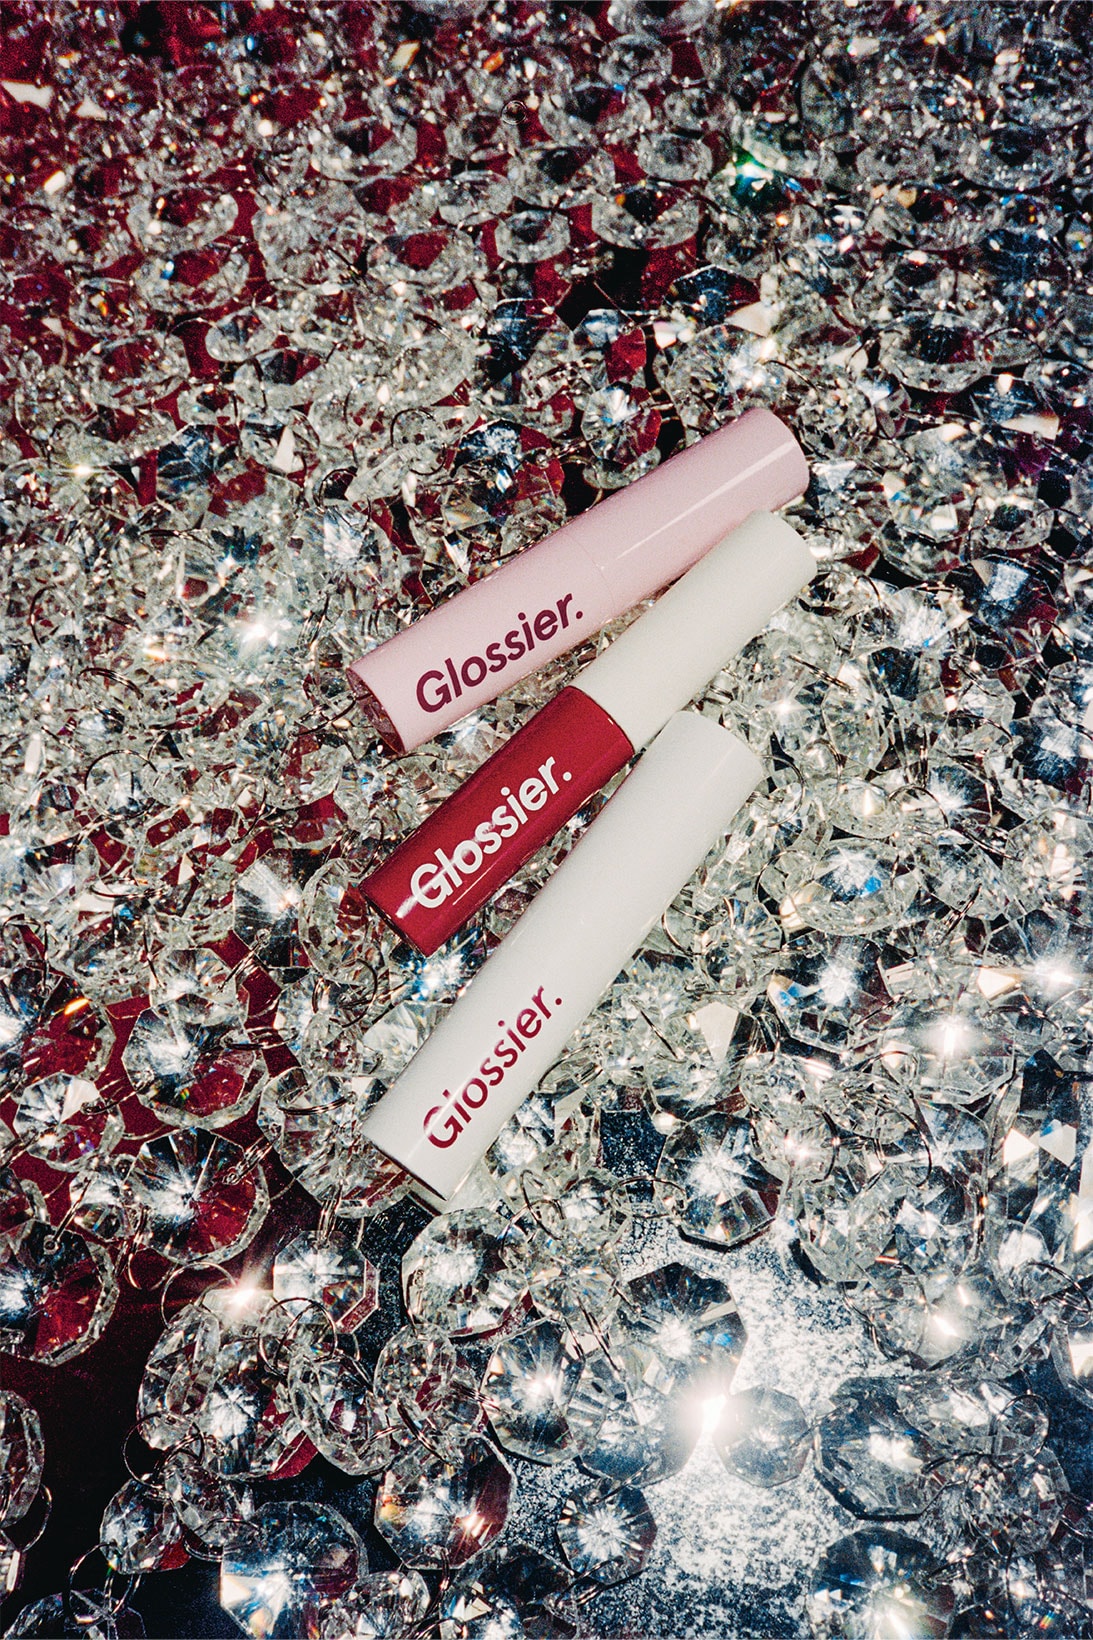 Glossier Holiday Christmas Gift Collection Lip Trio